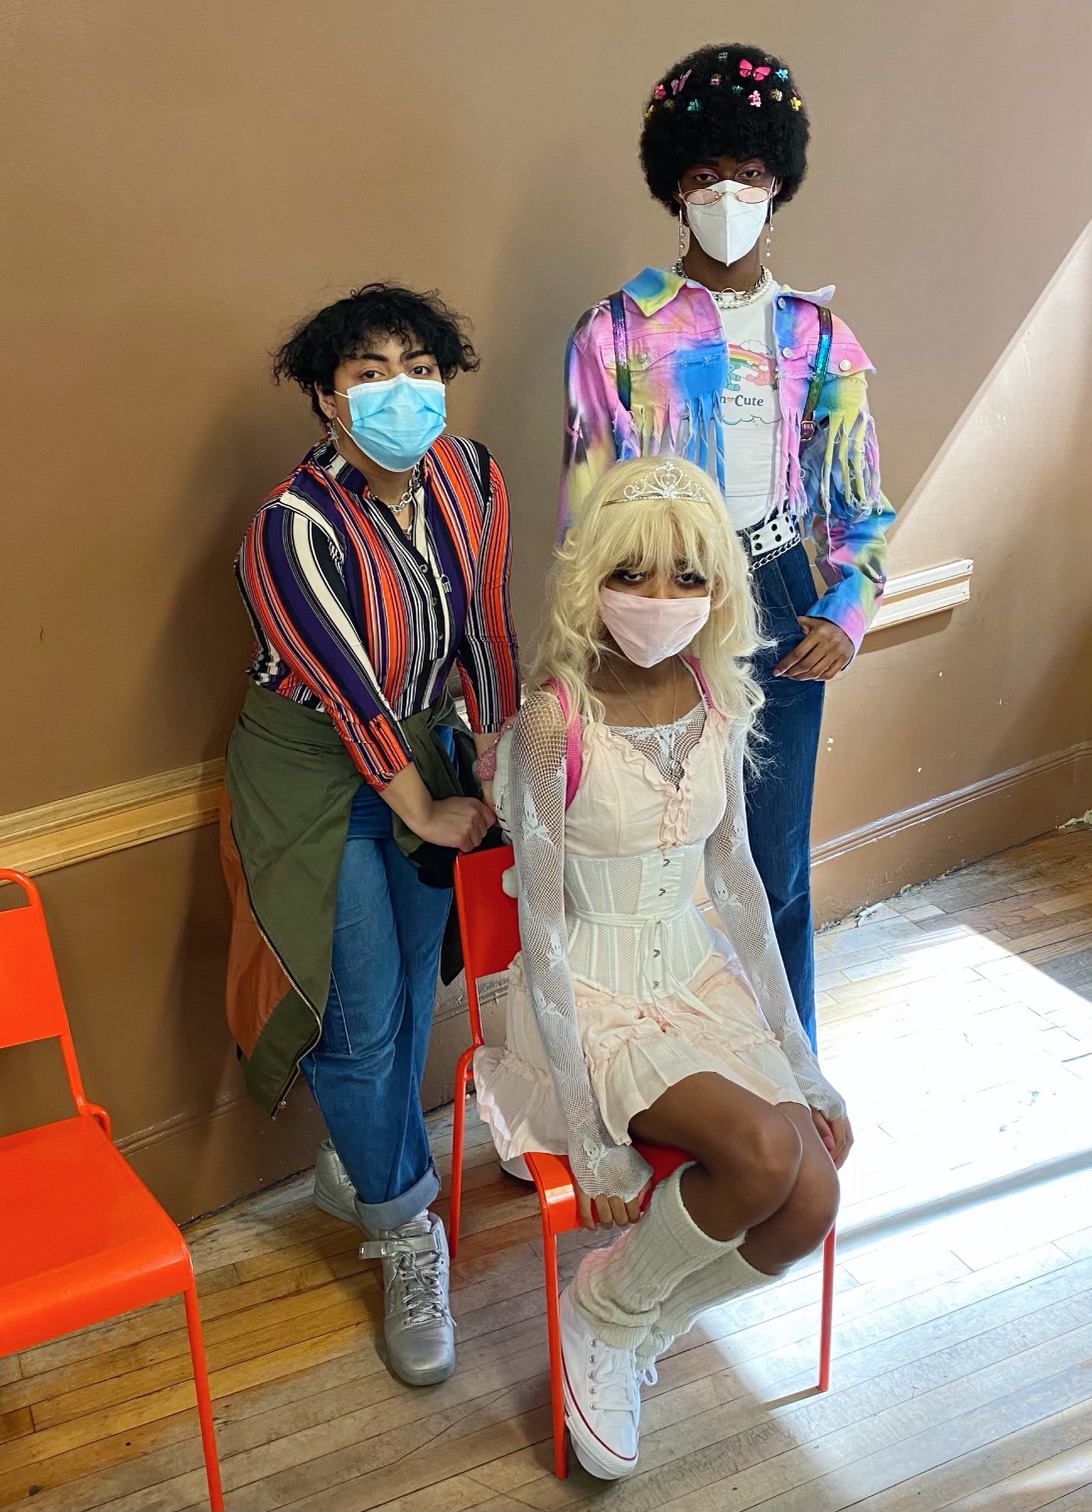 group of three partially seated. they wear a combination of retro stripe button downs, tie-dye denim jackets, and a pastel pink dress styled with a corset